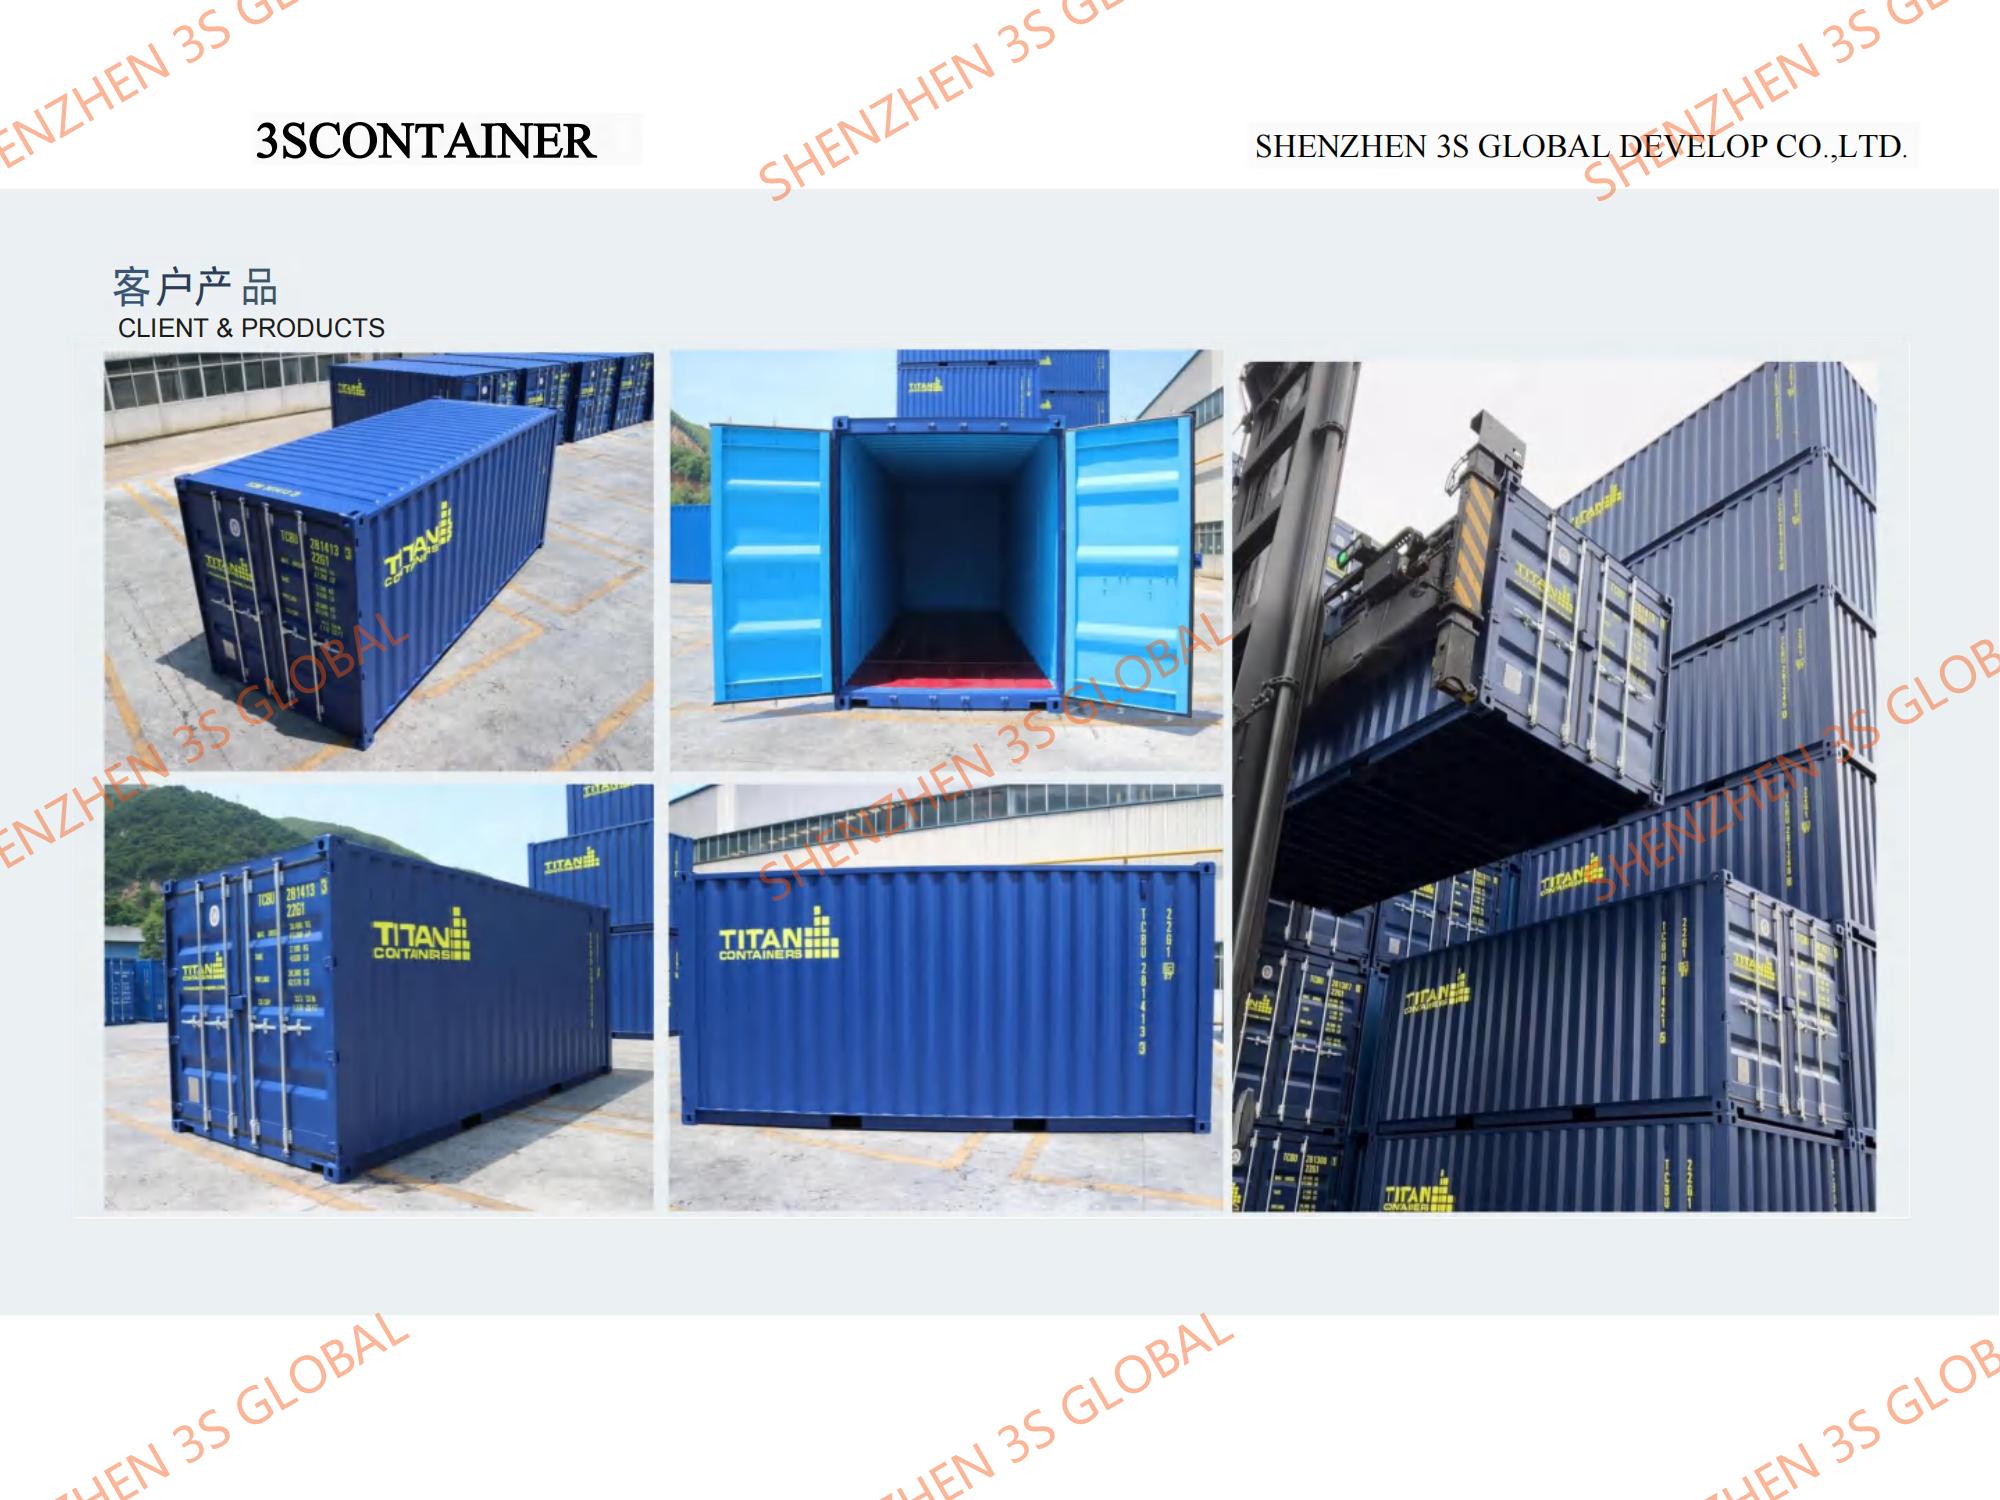 Special shipping container Manufacturers & Suppliers